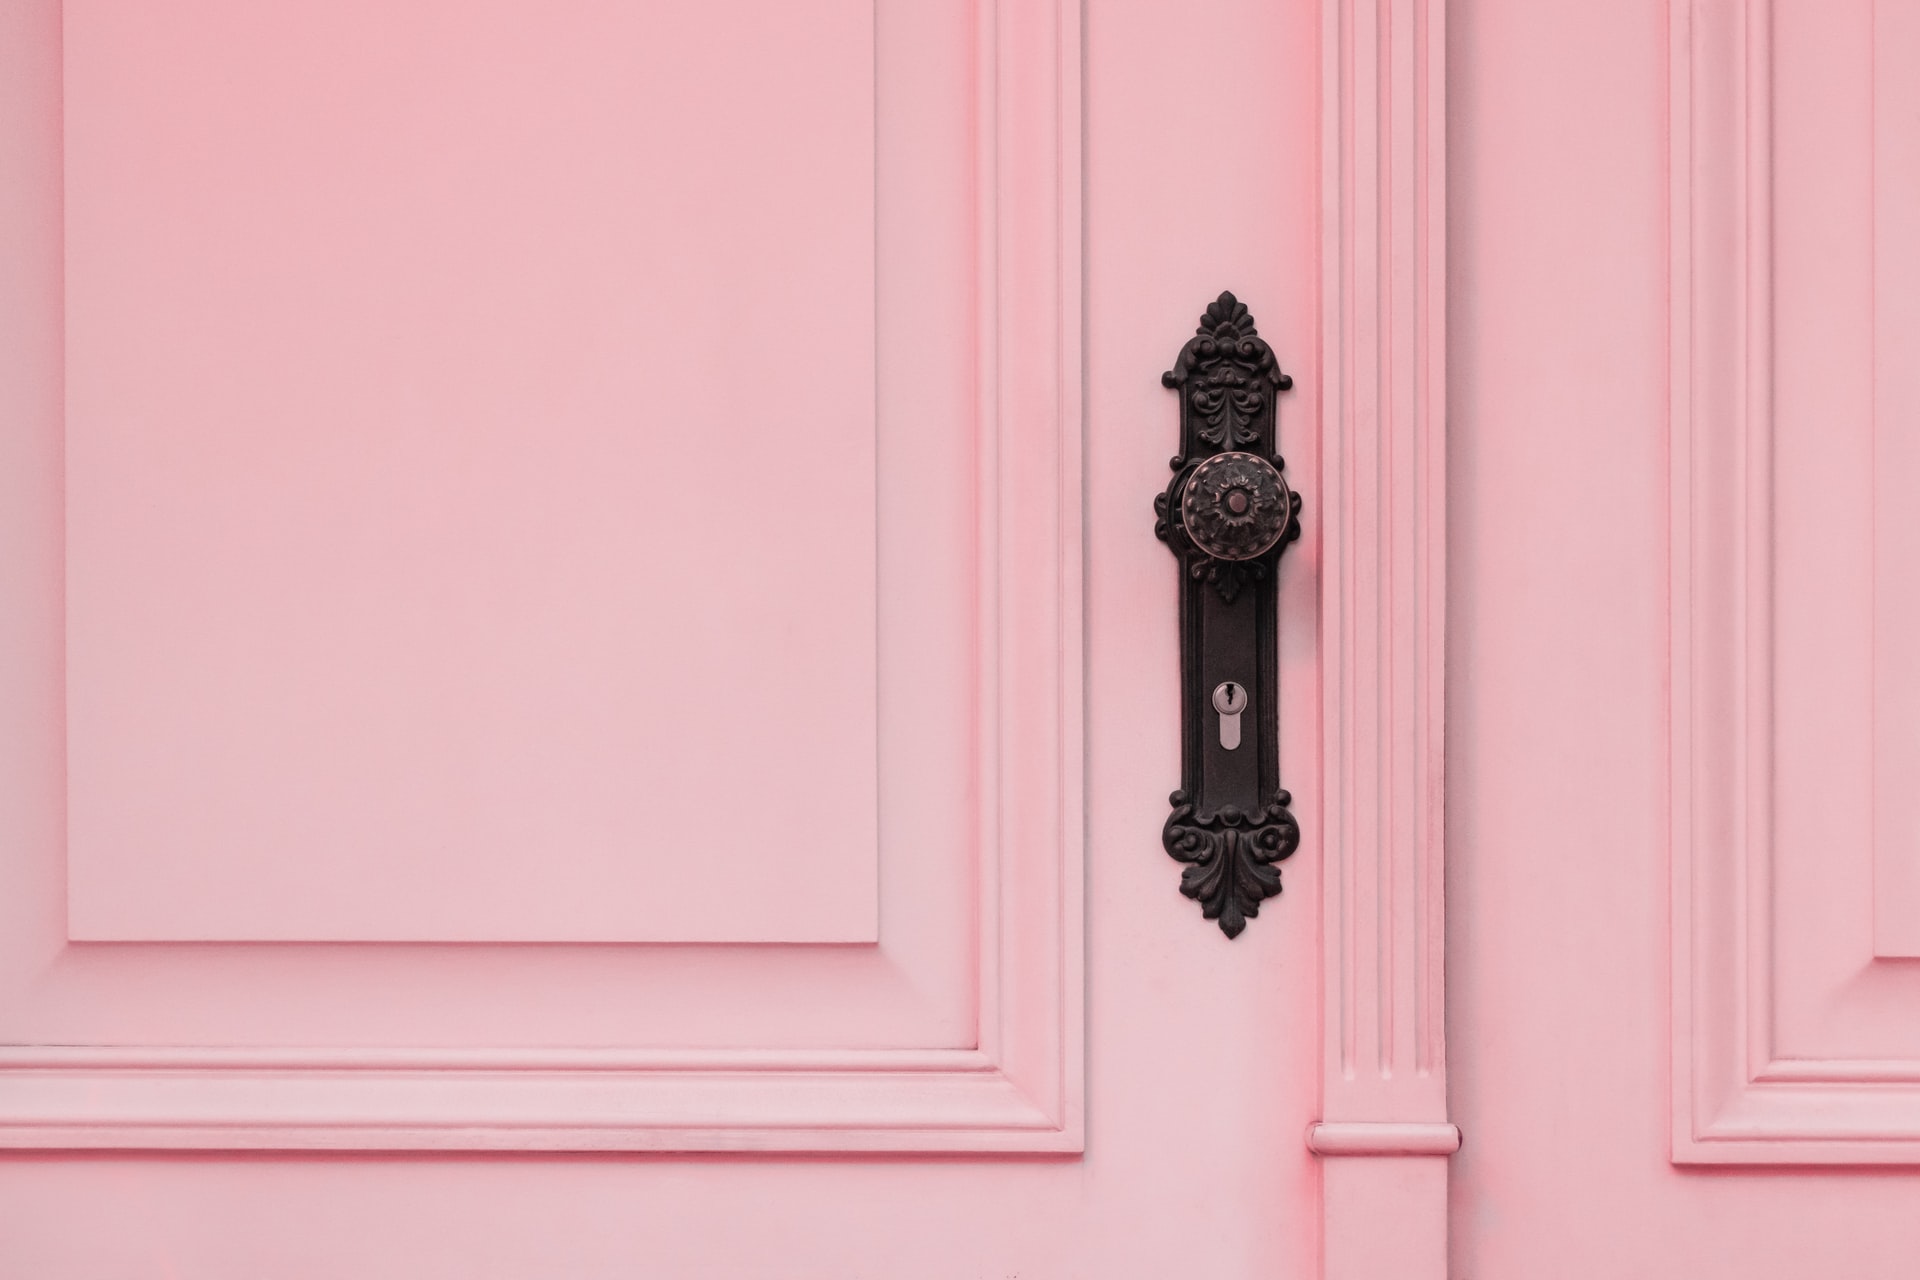 This is what you should be guided by when choosing doors for your home